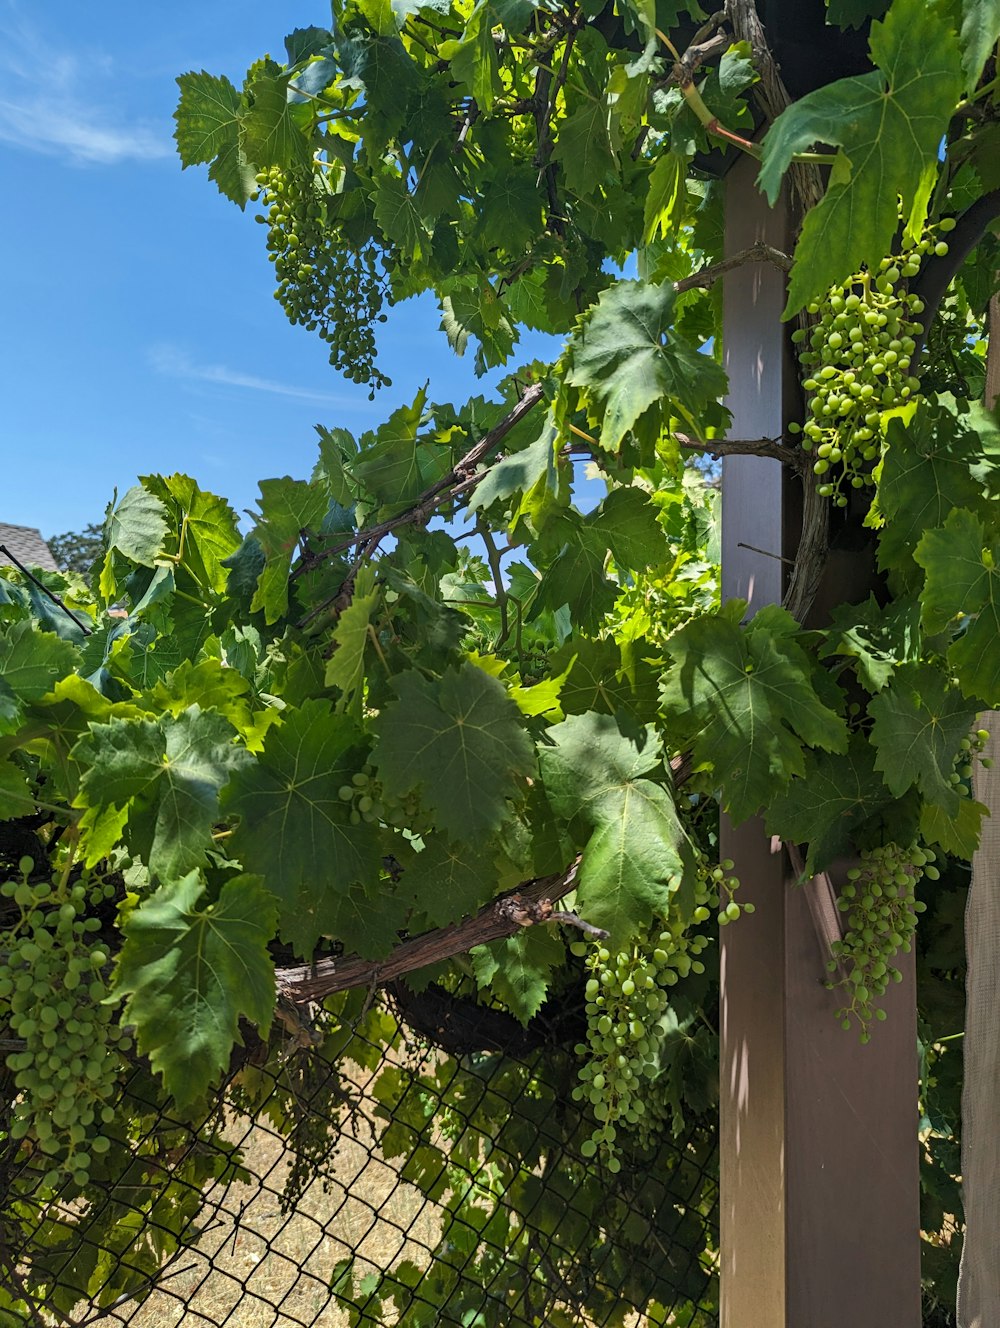 a bunch of green grapes growing on a vine